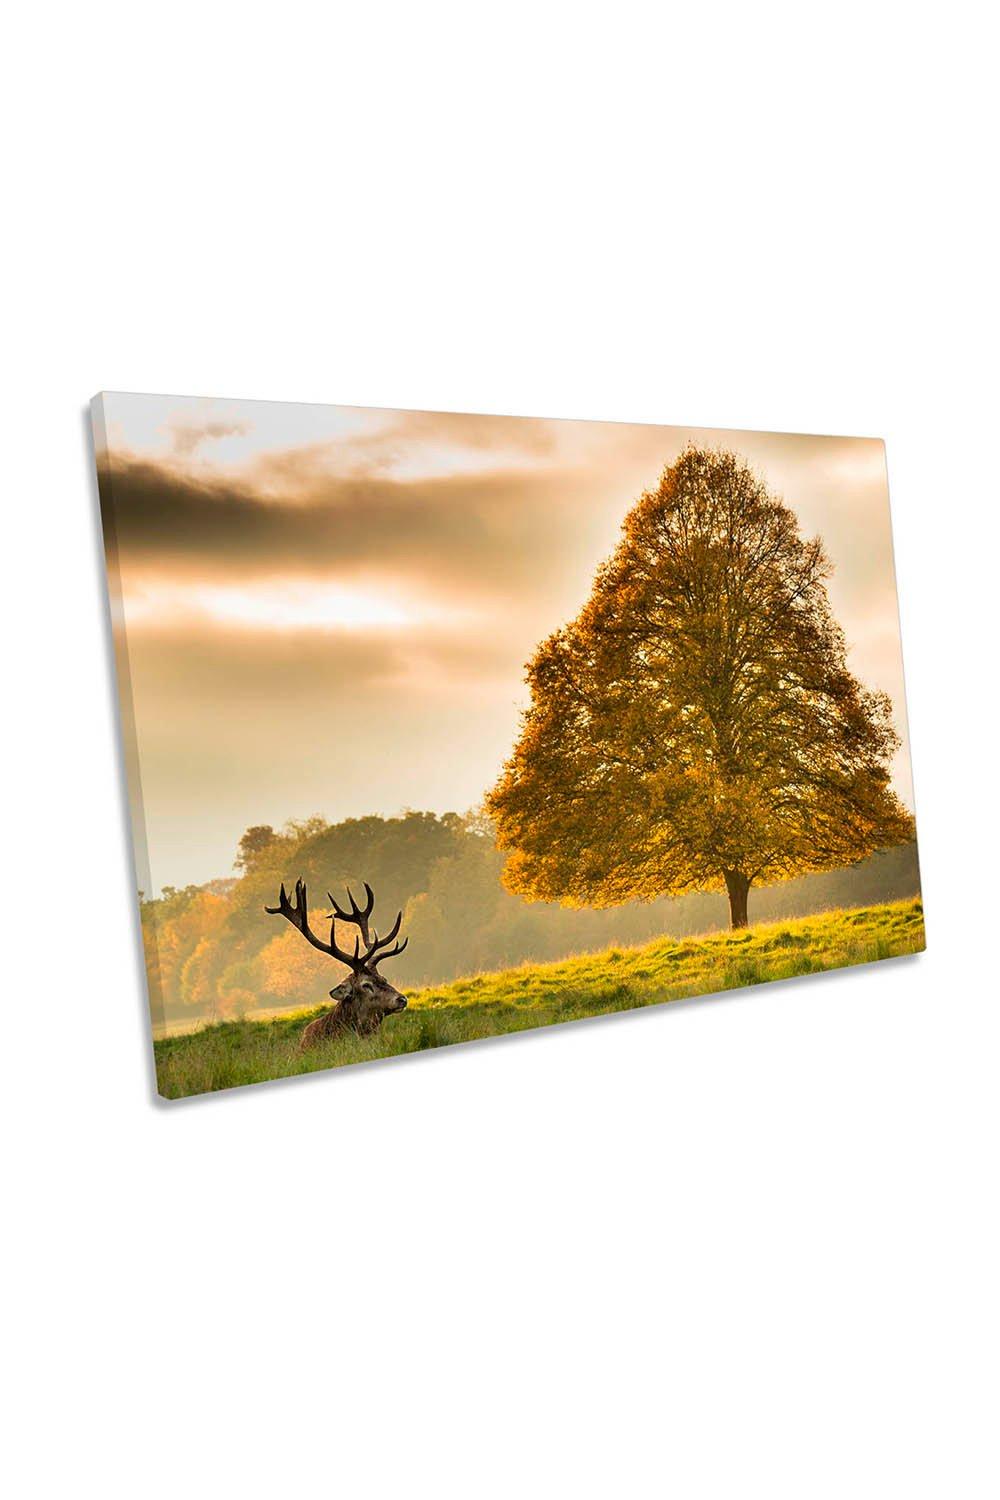 Deer Stag Antlers Tree Landscape Canvas Wall Art Picture Print